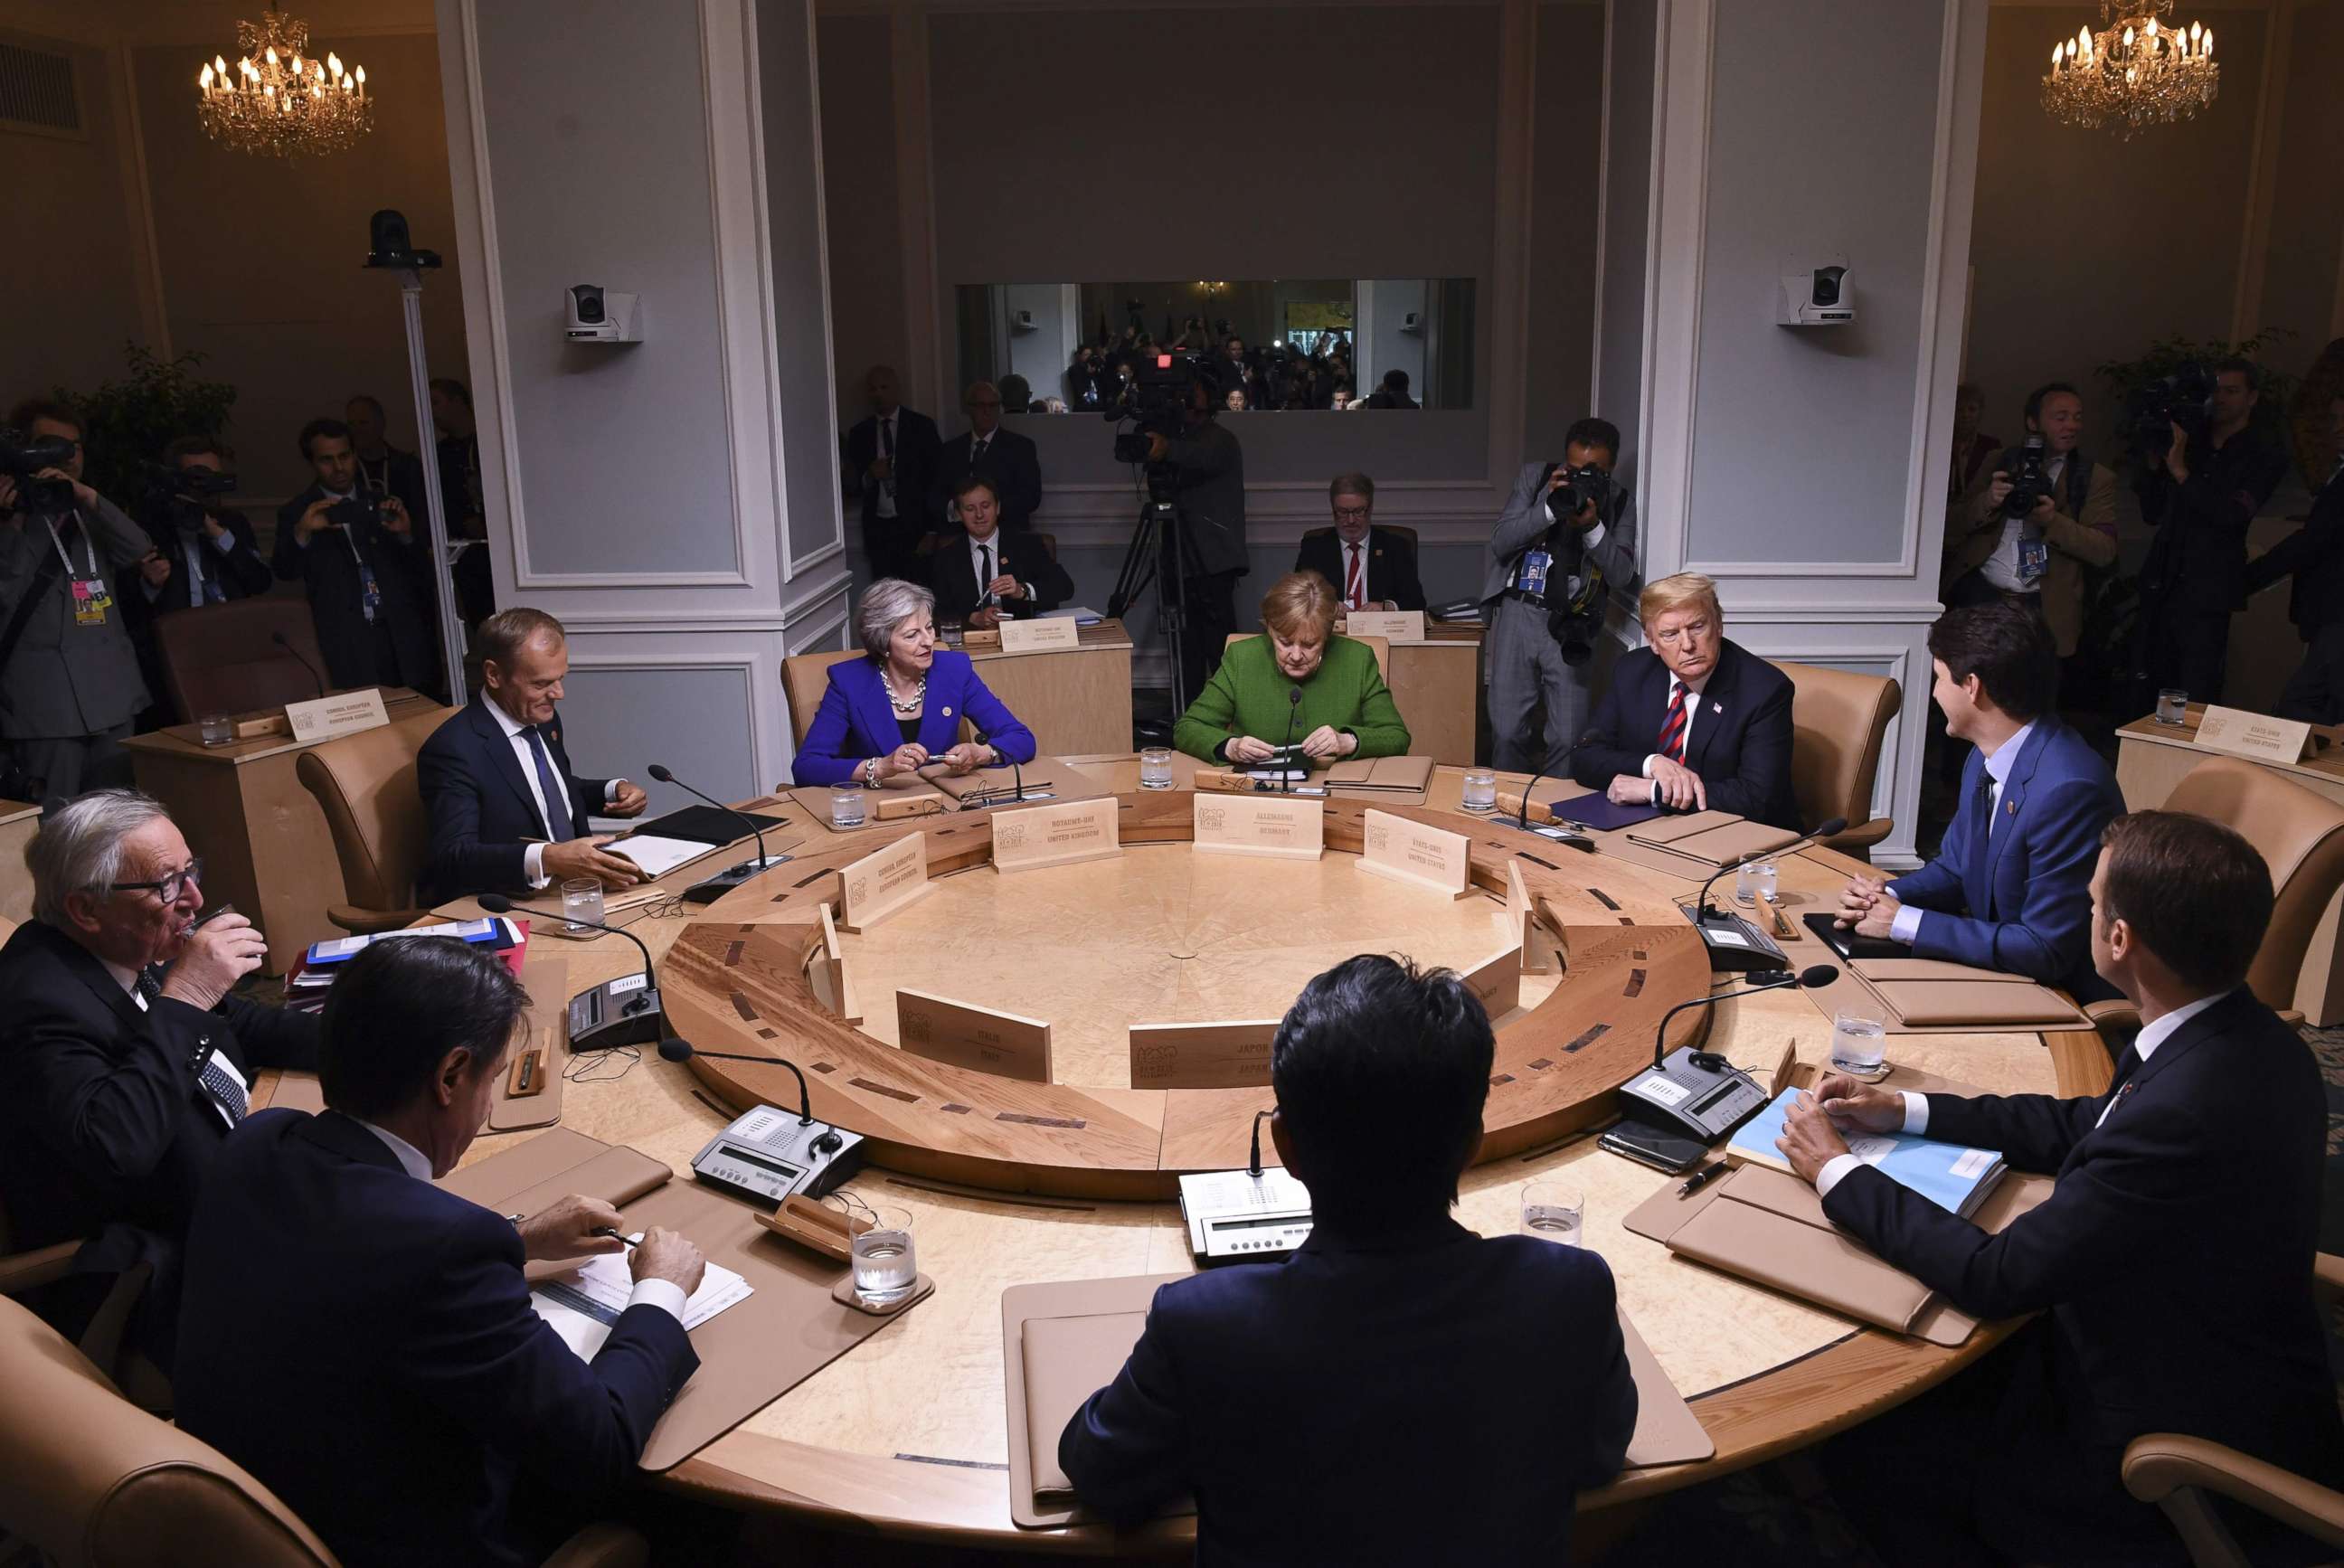 PHOTO: Leaders of the G7 participate in a working session of the G7 Summit in La Malbaie, Quebec, Canada, June 8, 2018.
